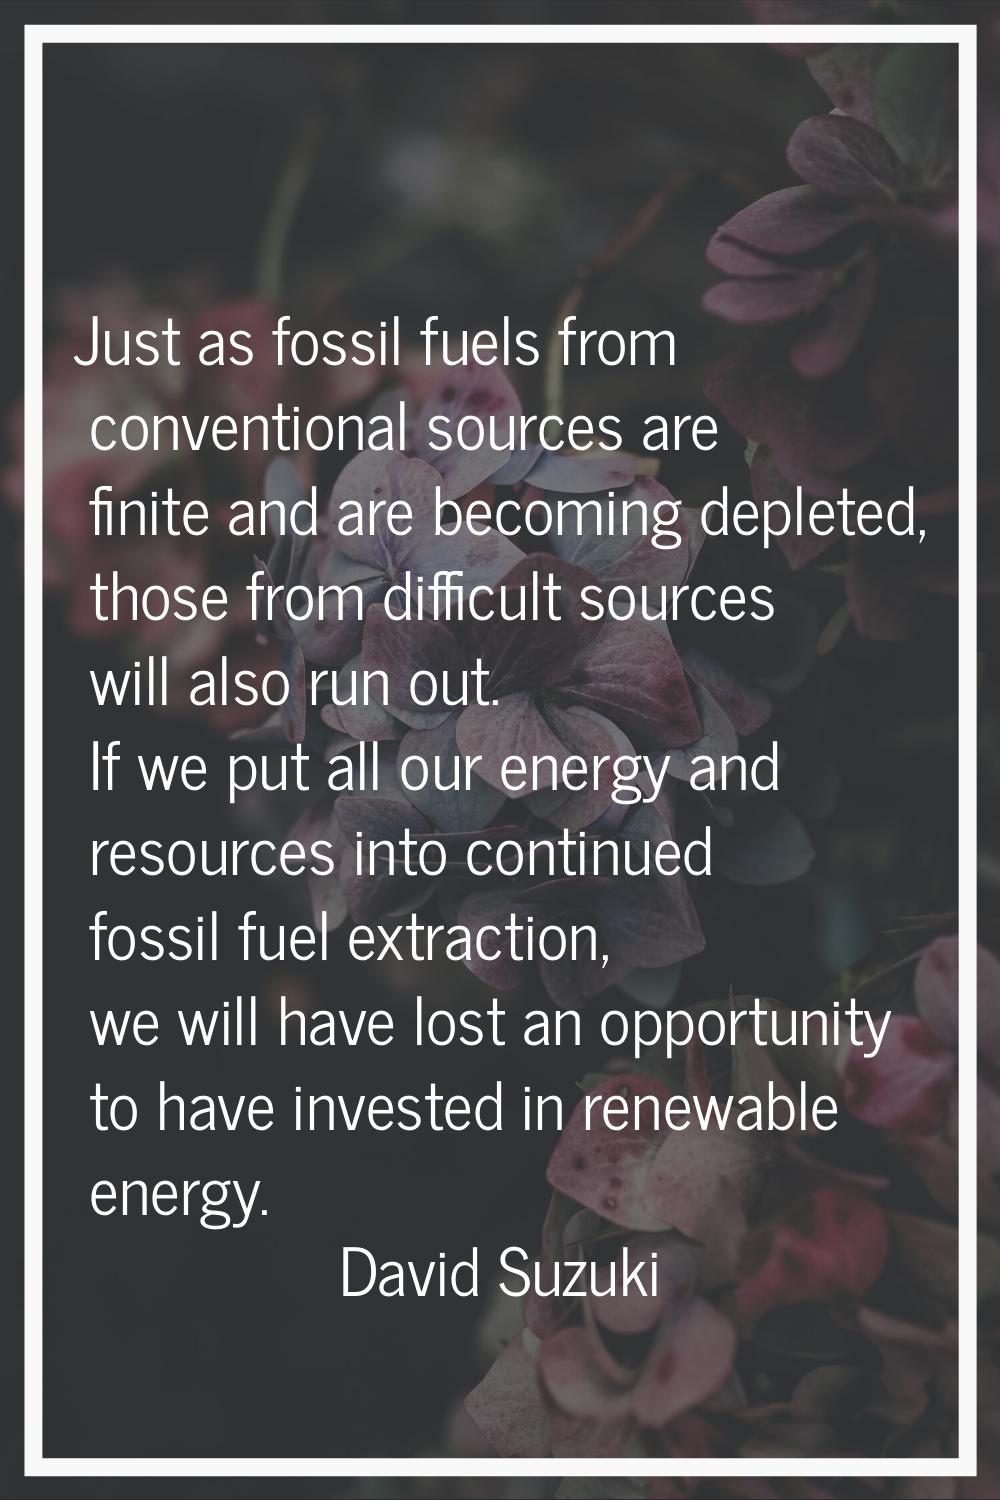 Just as fossil fuels from conventional sources are finite and are becoming depleted, those from dif